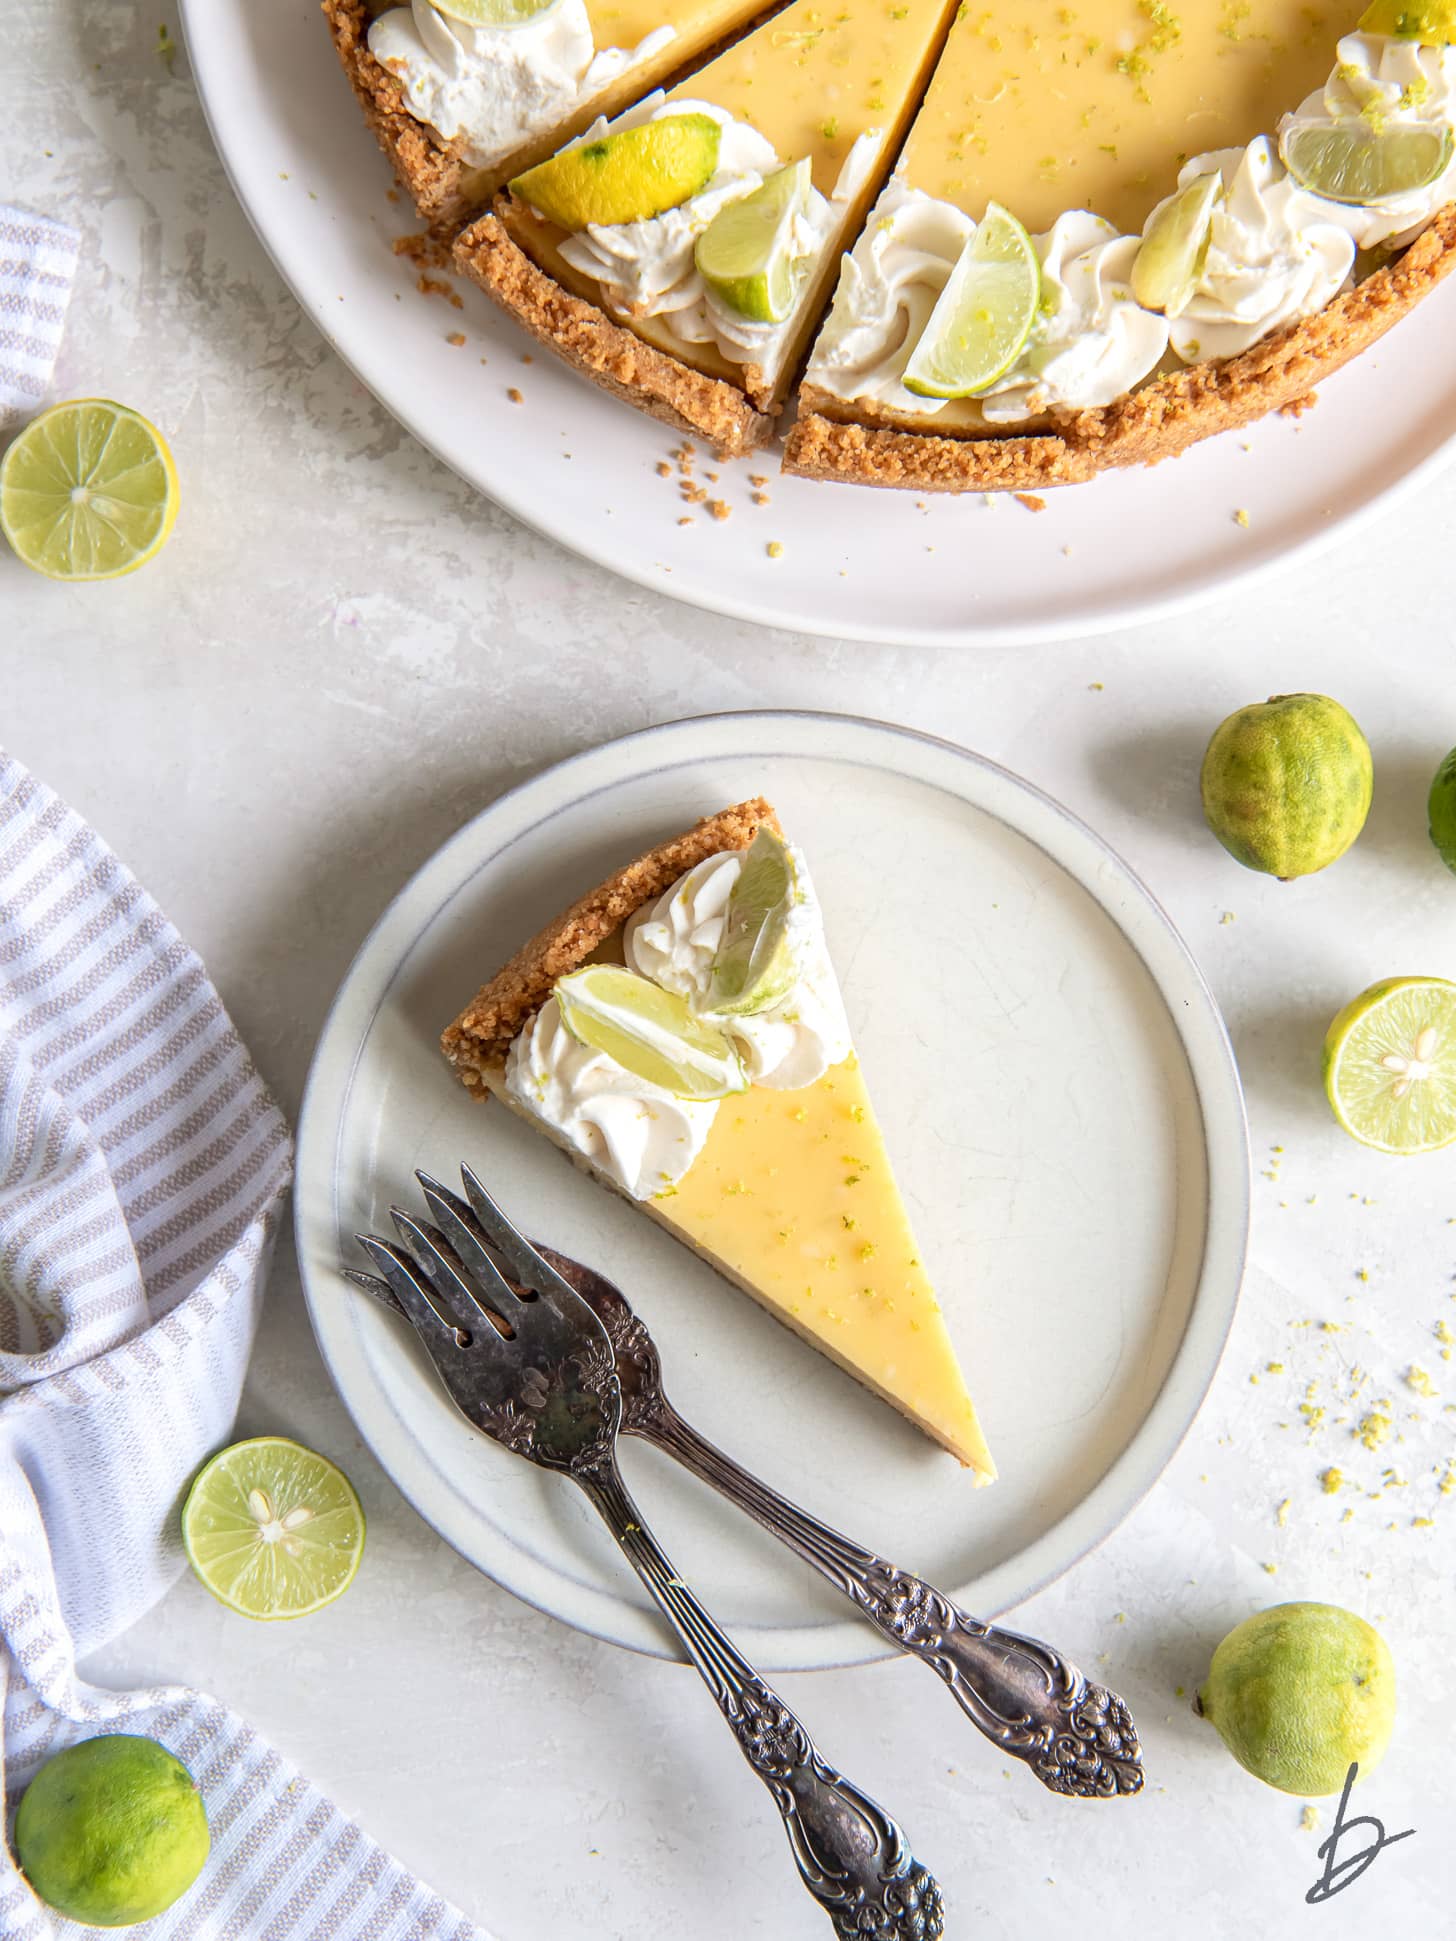 key lime pie slice on plate with two forks next to some limes.